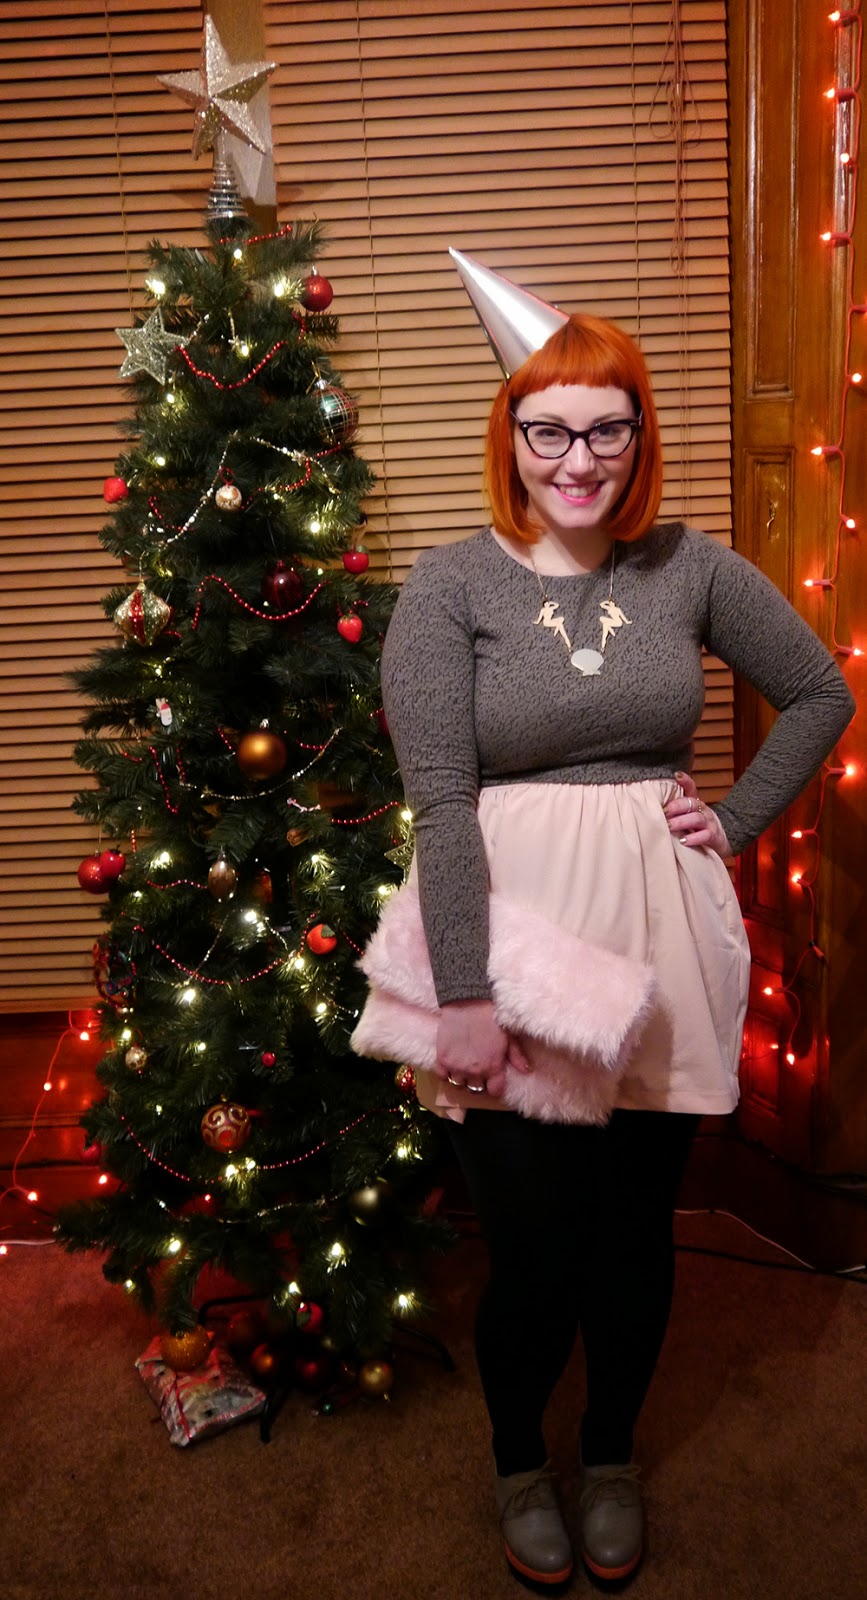 Outfit, party outfit, new years eve, hogmanay, ninties style, 90's style outfit,Wear Eponymous crop top, Wear Eponymous skirt, Wear Eponymous Outfit, Karen Mabon necklace, Party hat, pink faux fur clutch bag, platform shoes, Scottish bloggers, retro hogmanay, Christmas tree, festive style